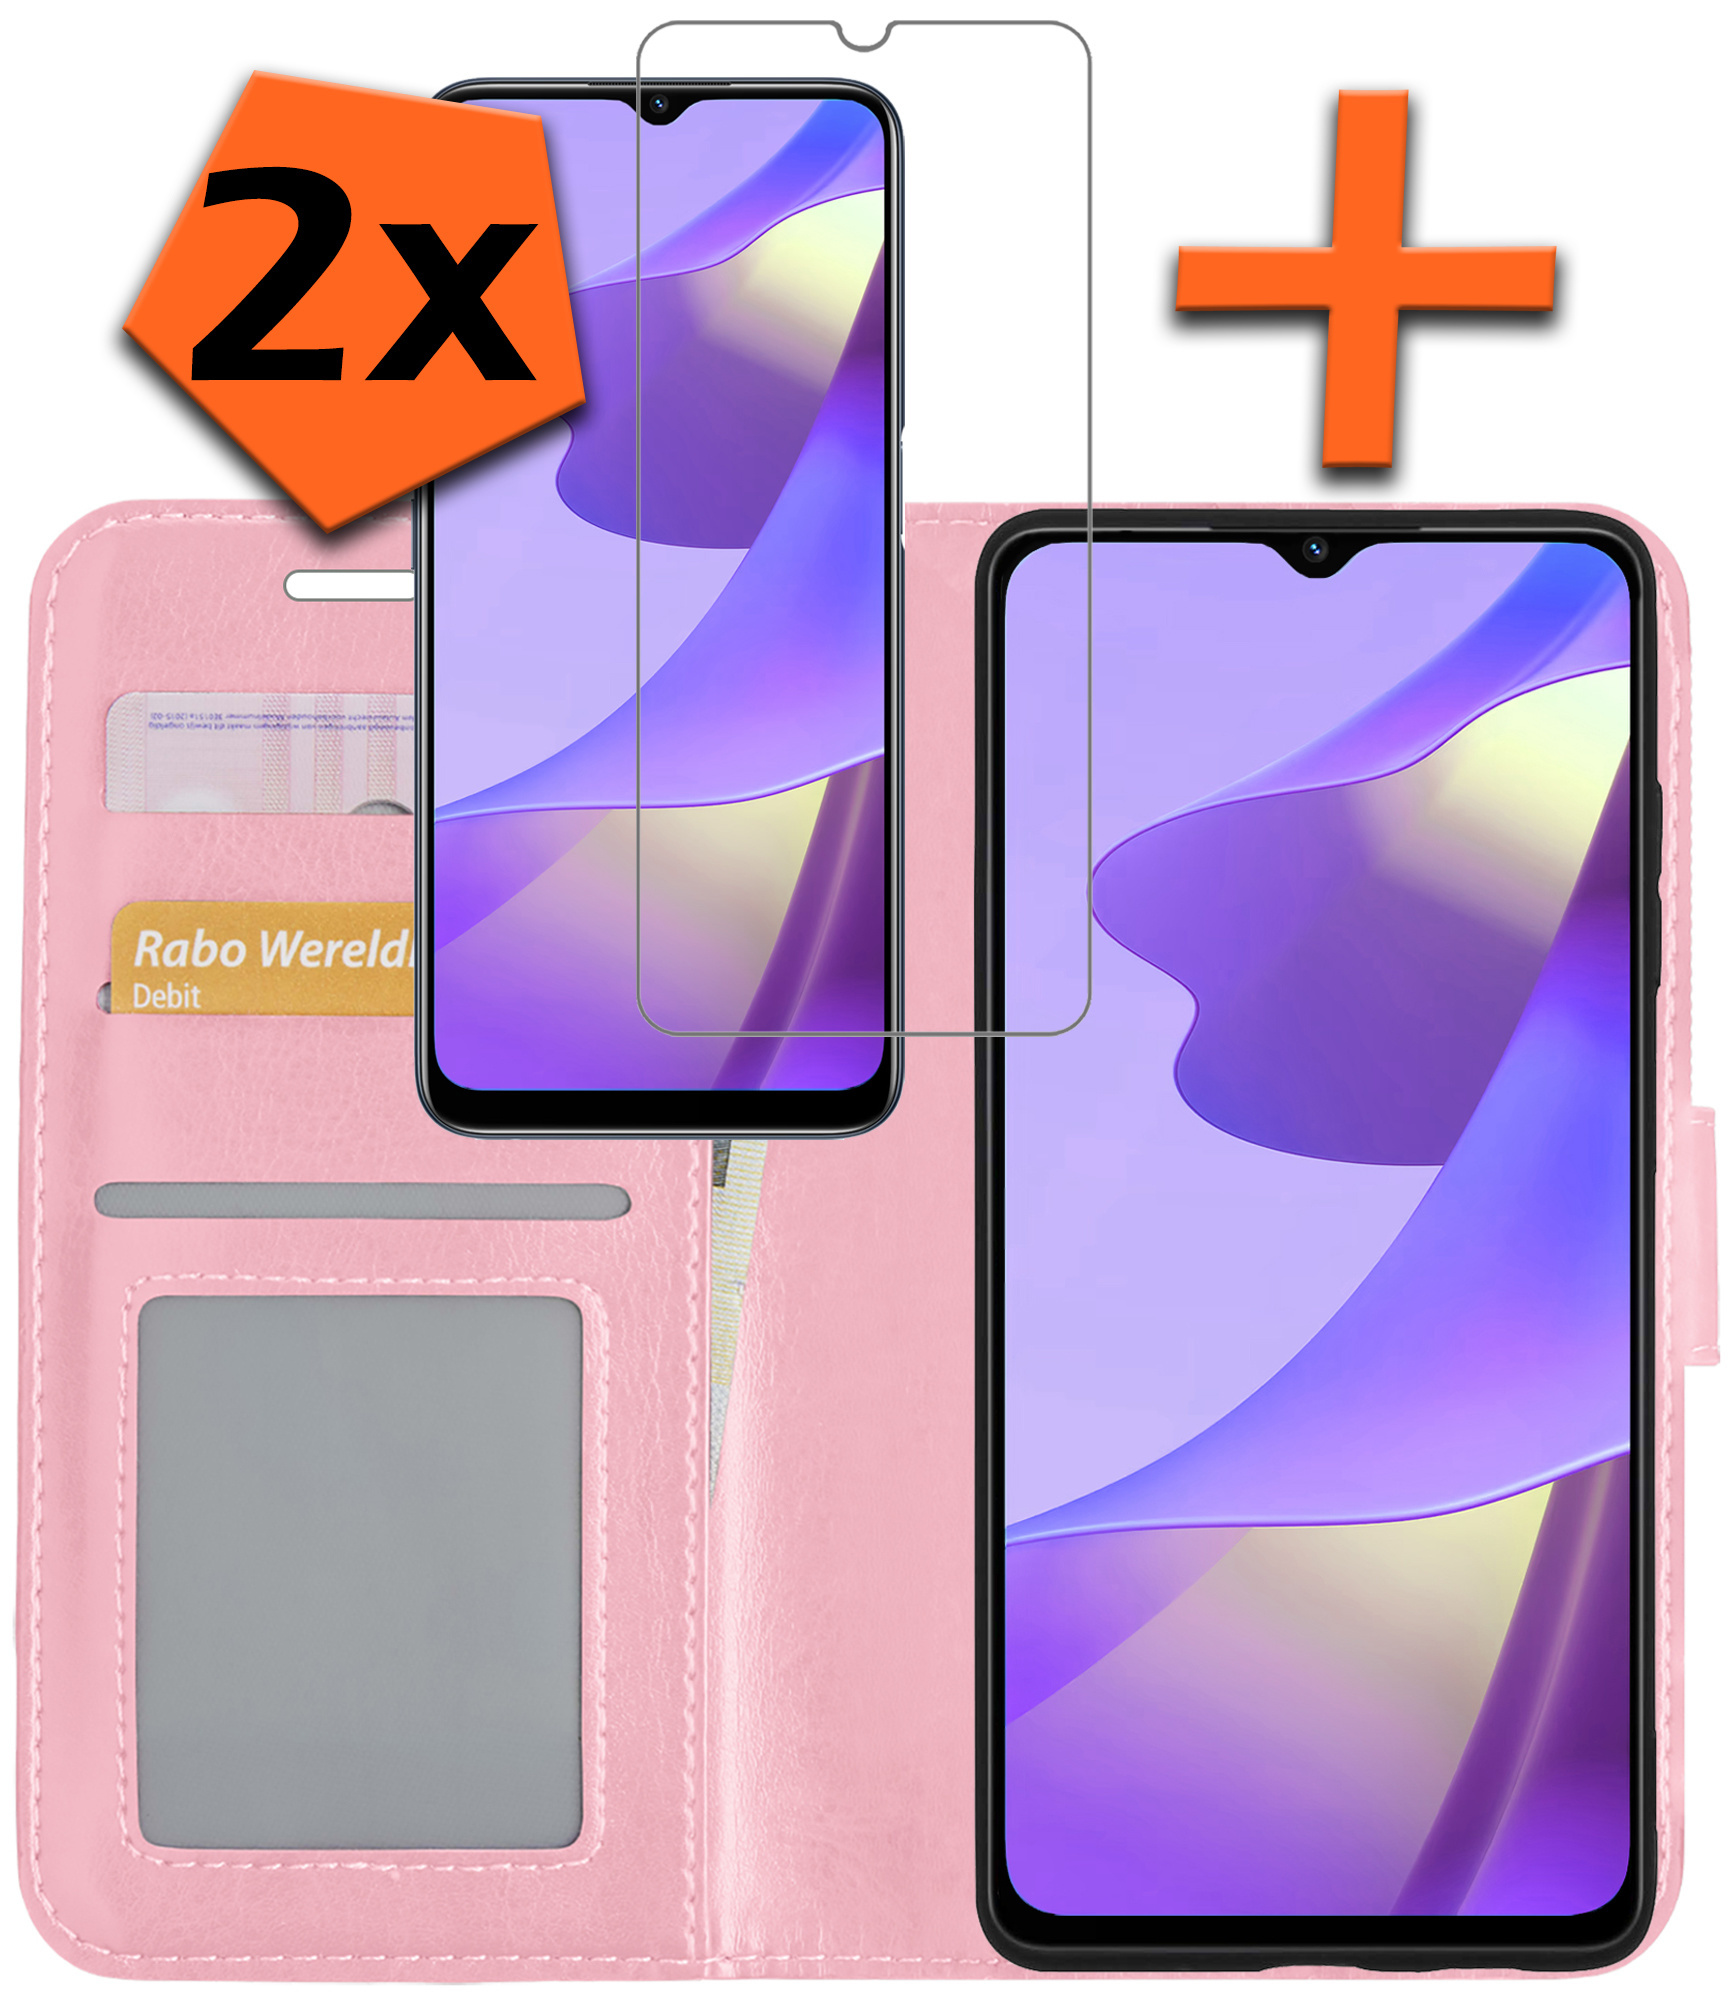 Nomfy OPPO A16s Hoesje Bookcase Met 2x Screenprotector - OPPO A16s Screenprotector 2x - OPPO A16s Book Case Met 2x Screenprotector Licht Roze